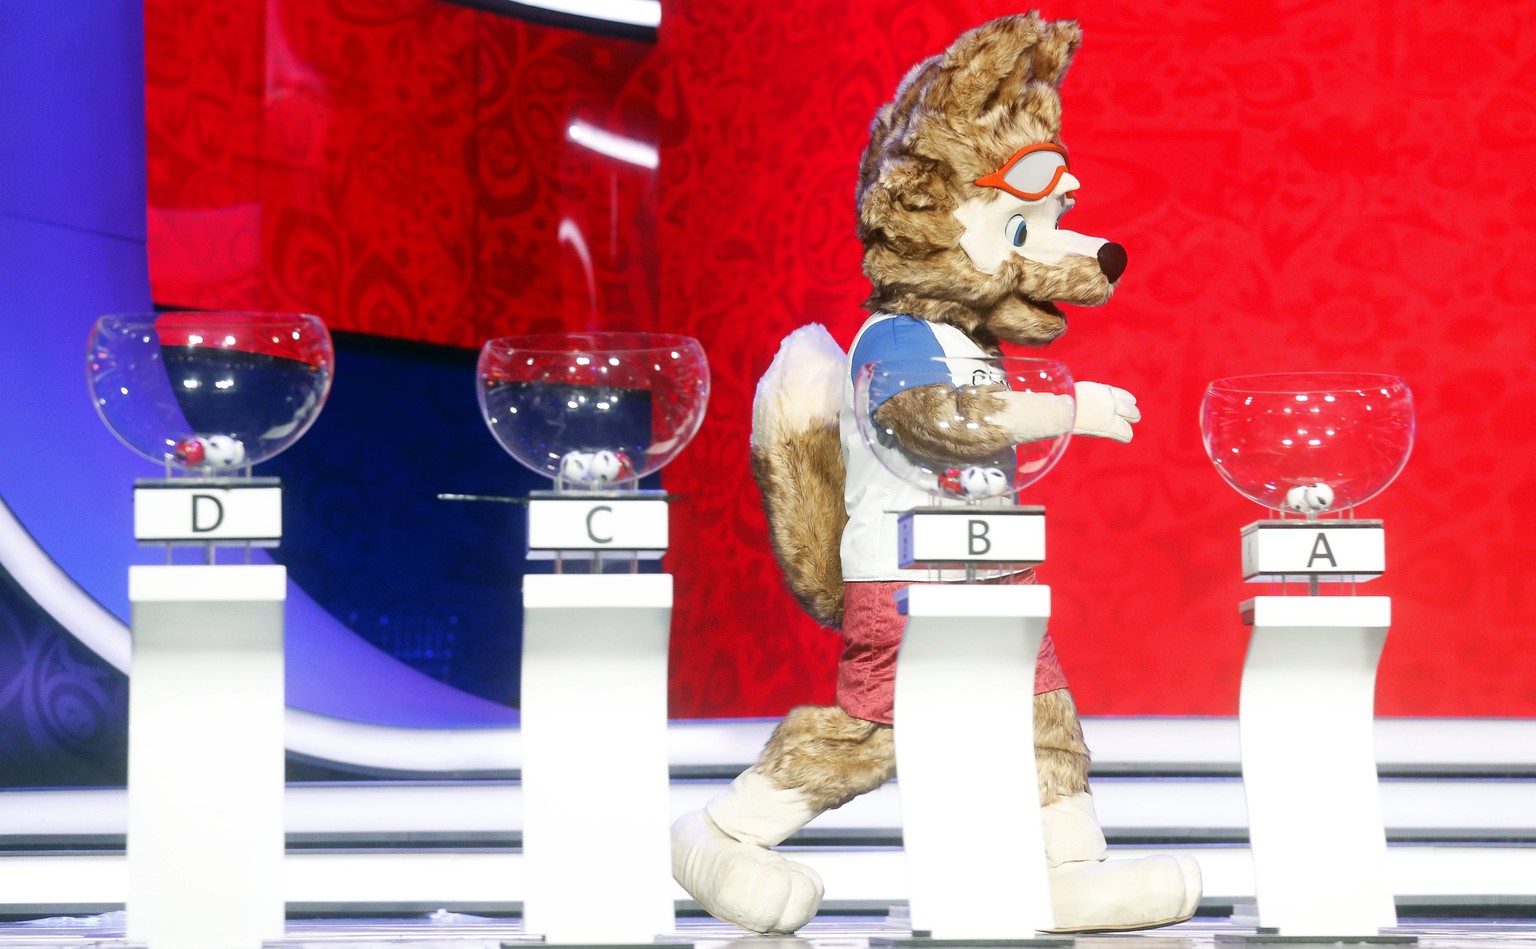 epa06357444 The official mascot of the FIFA World Cup 2018, the wolf Zabivaka, attends a rehearse on stage for the FIFA World Cup 2018 Final Draw in the State Kremlin Palace in Moscow, Russia, 29 Nove ...